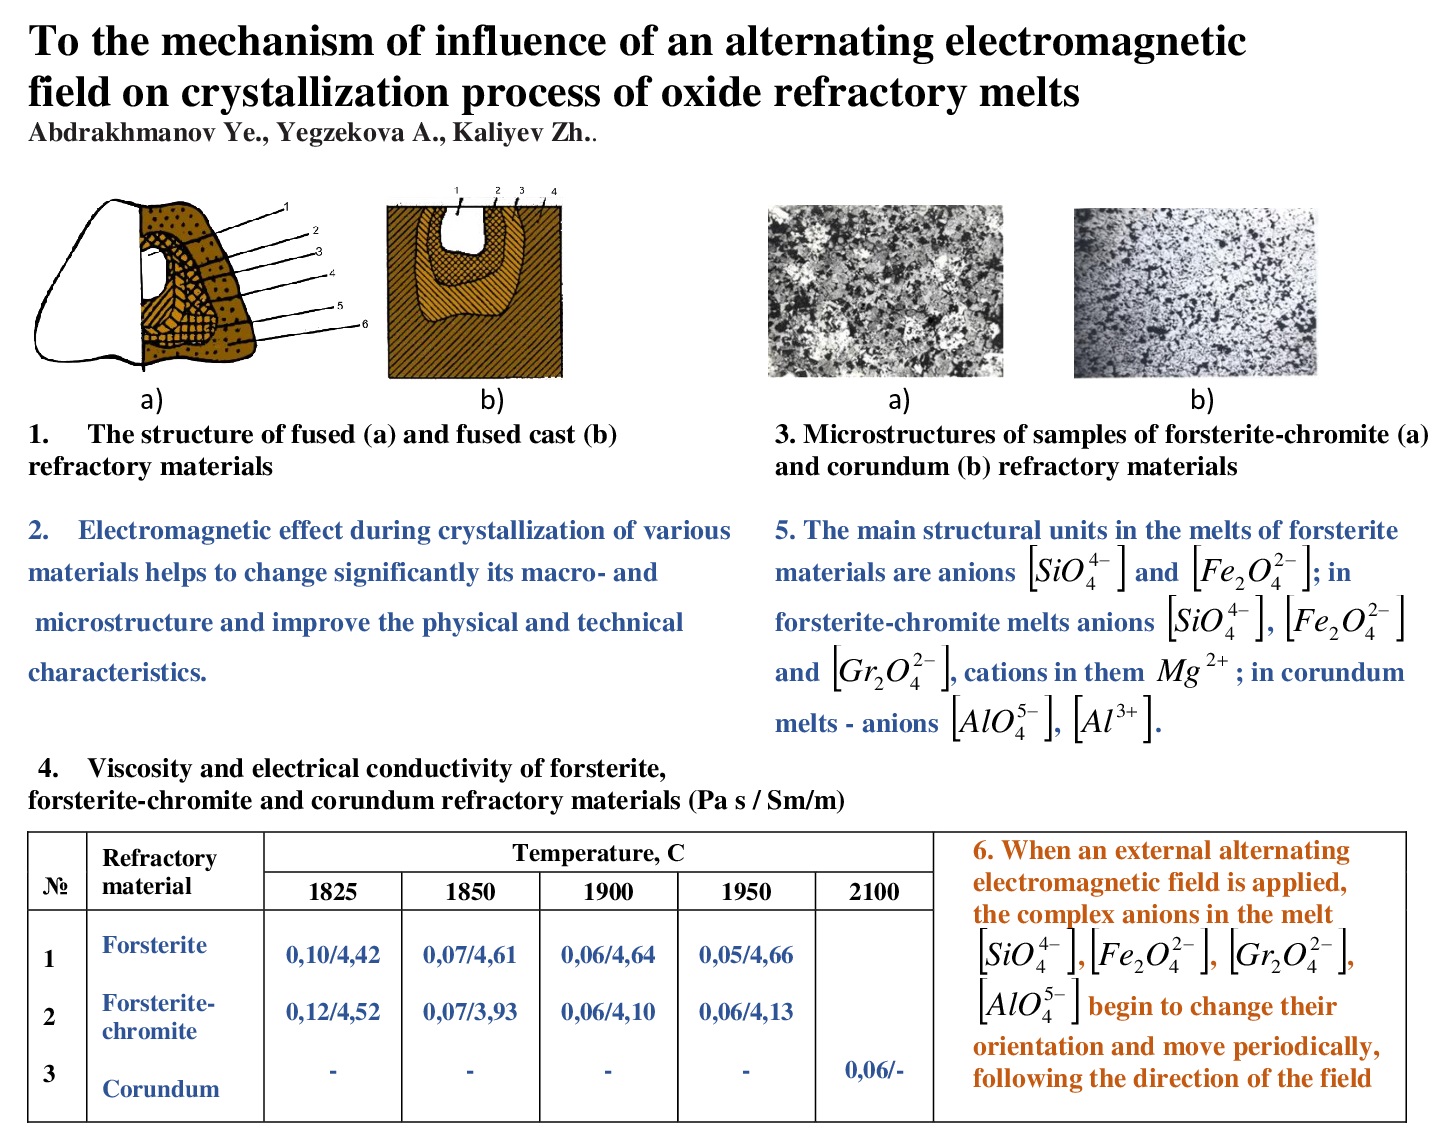 To the mechanism of influence of an alternating electromagnetic field on crystallization process of oxide refractory melts